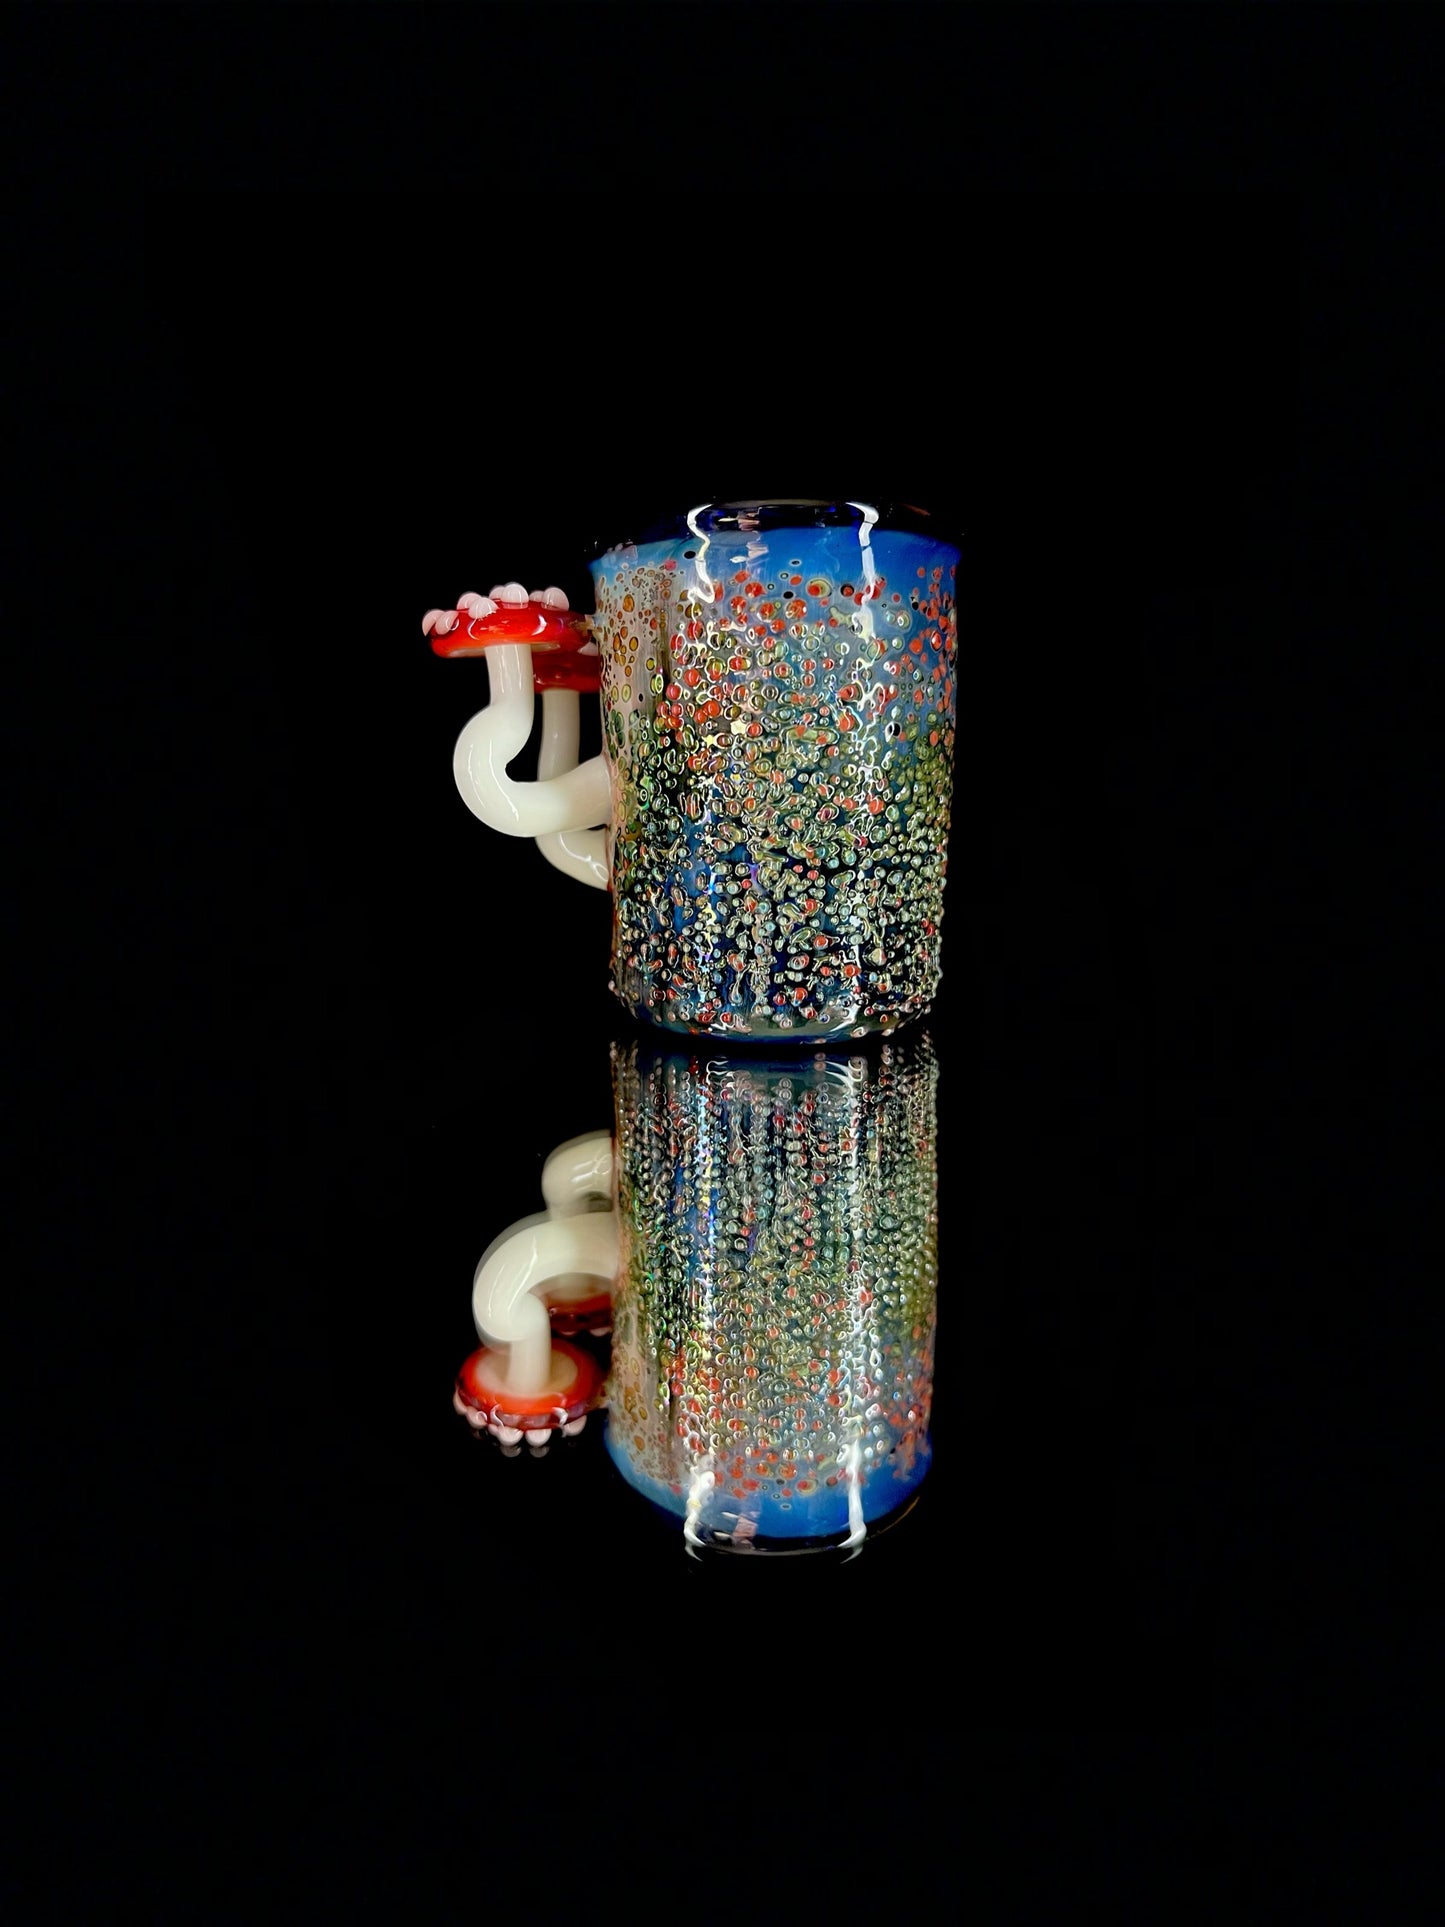 Cyclops shot glass by Leviathan Glass